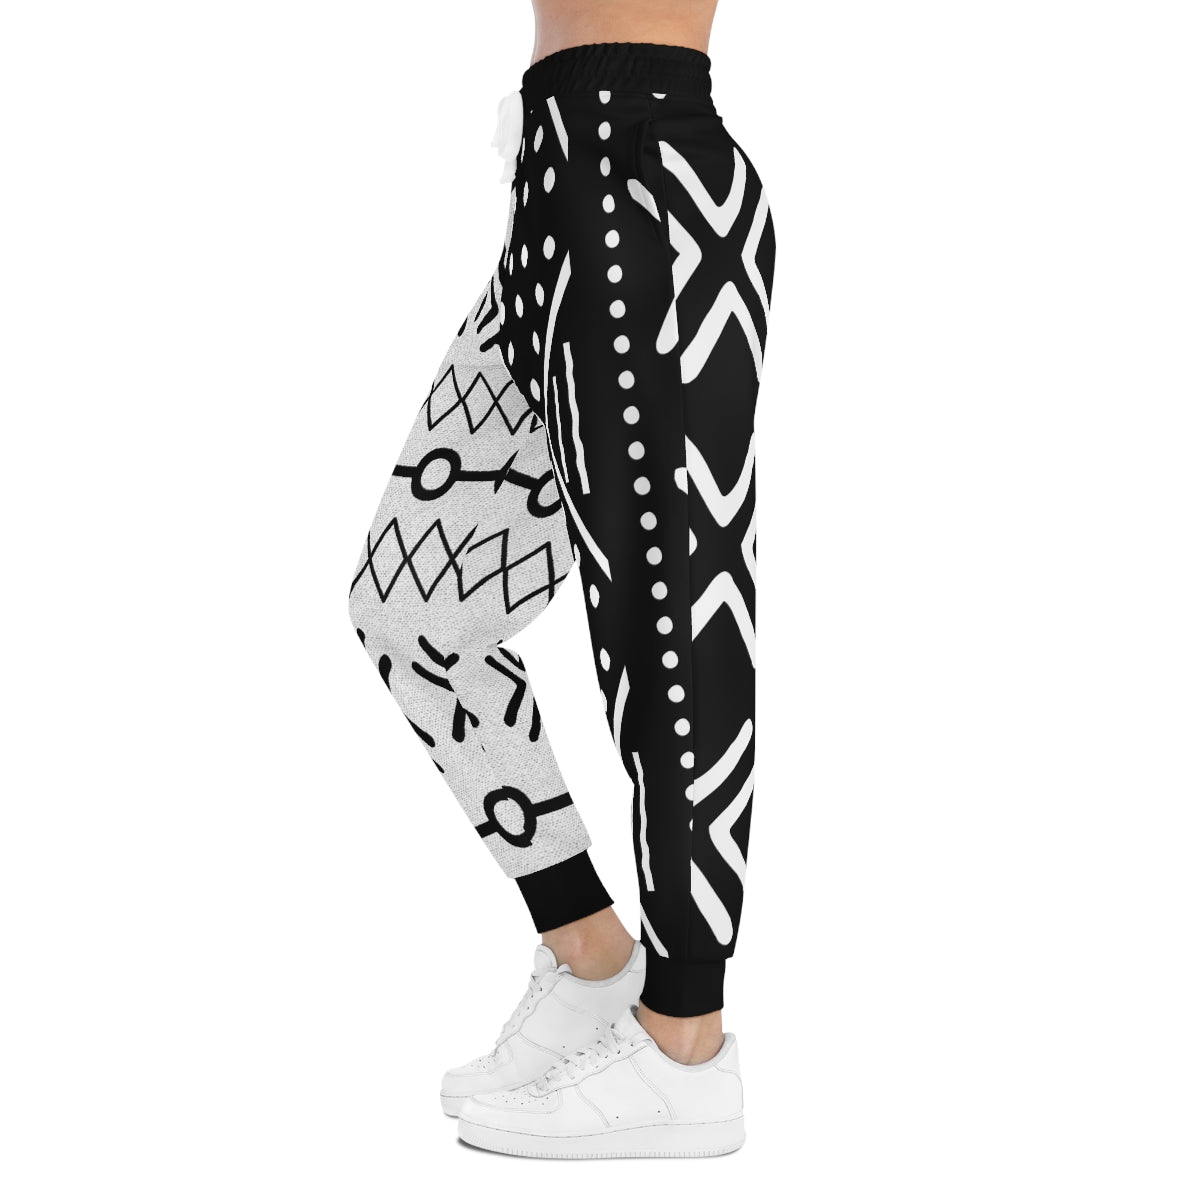 Unisex Mixed MudCloth Black and White Pattern Joggers Pants